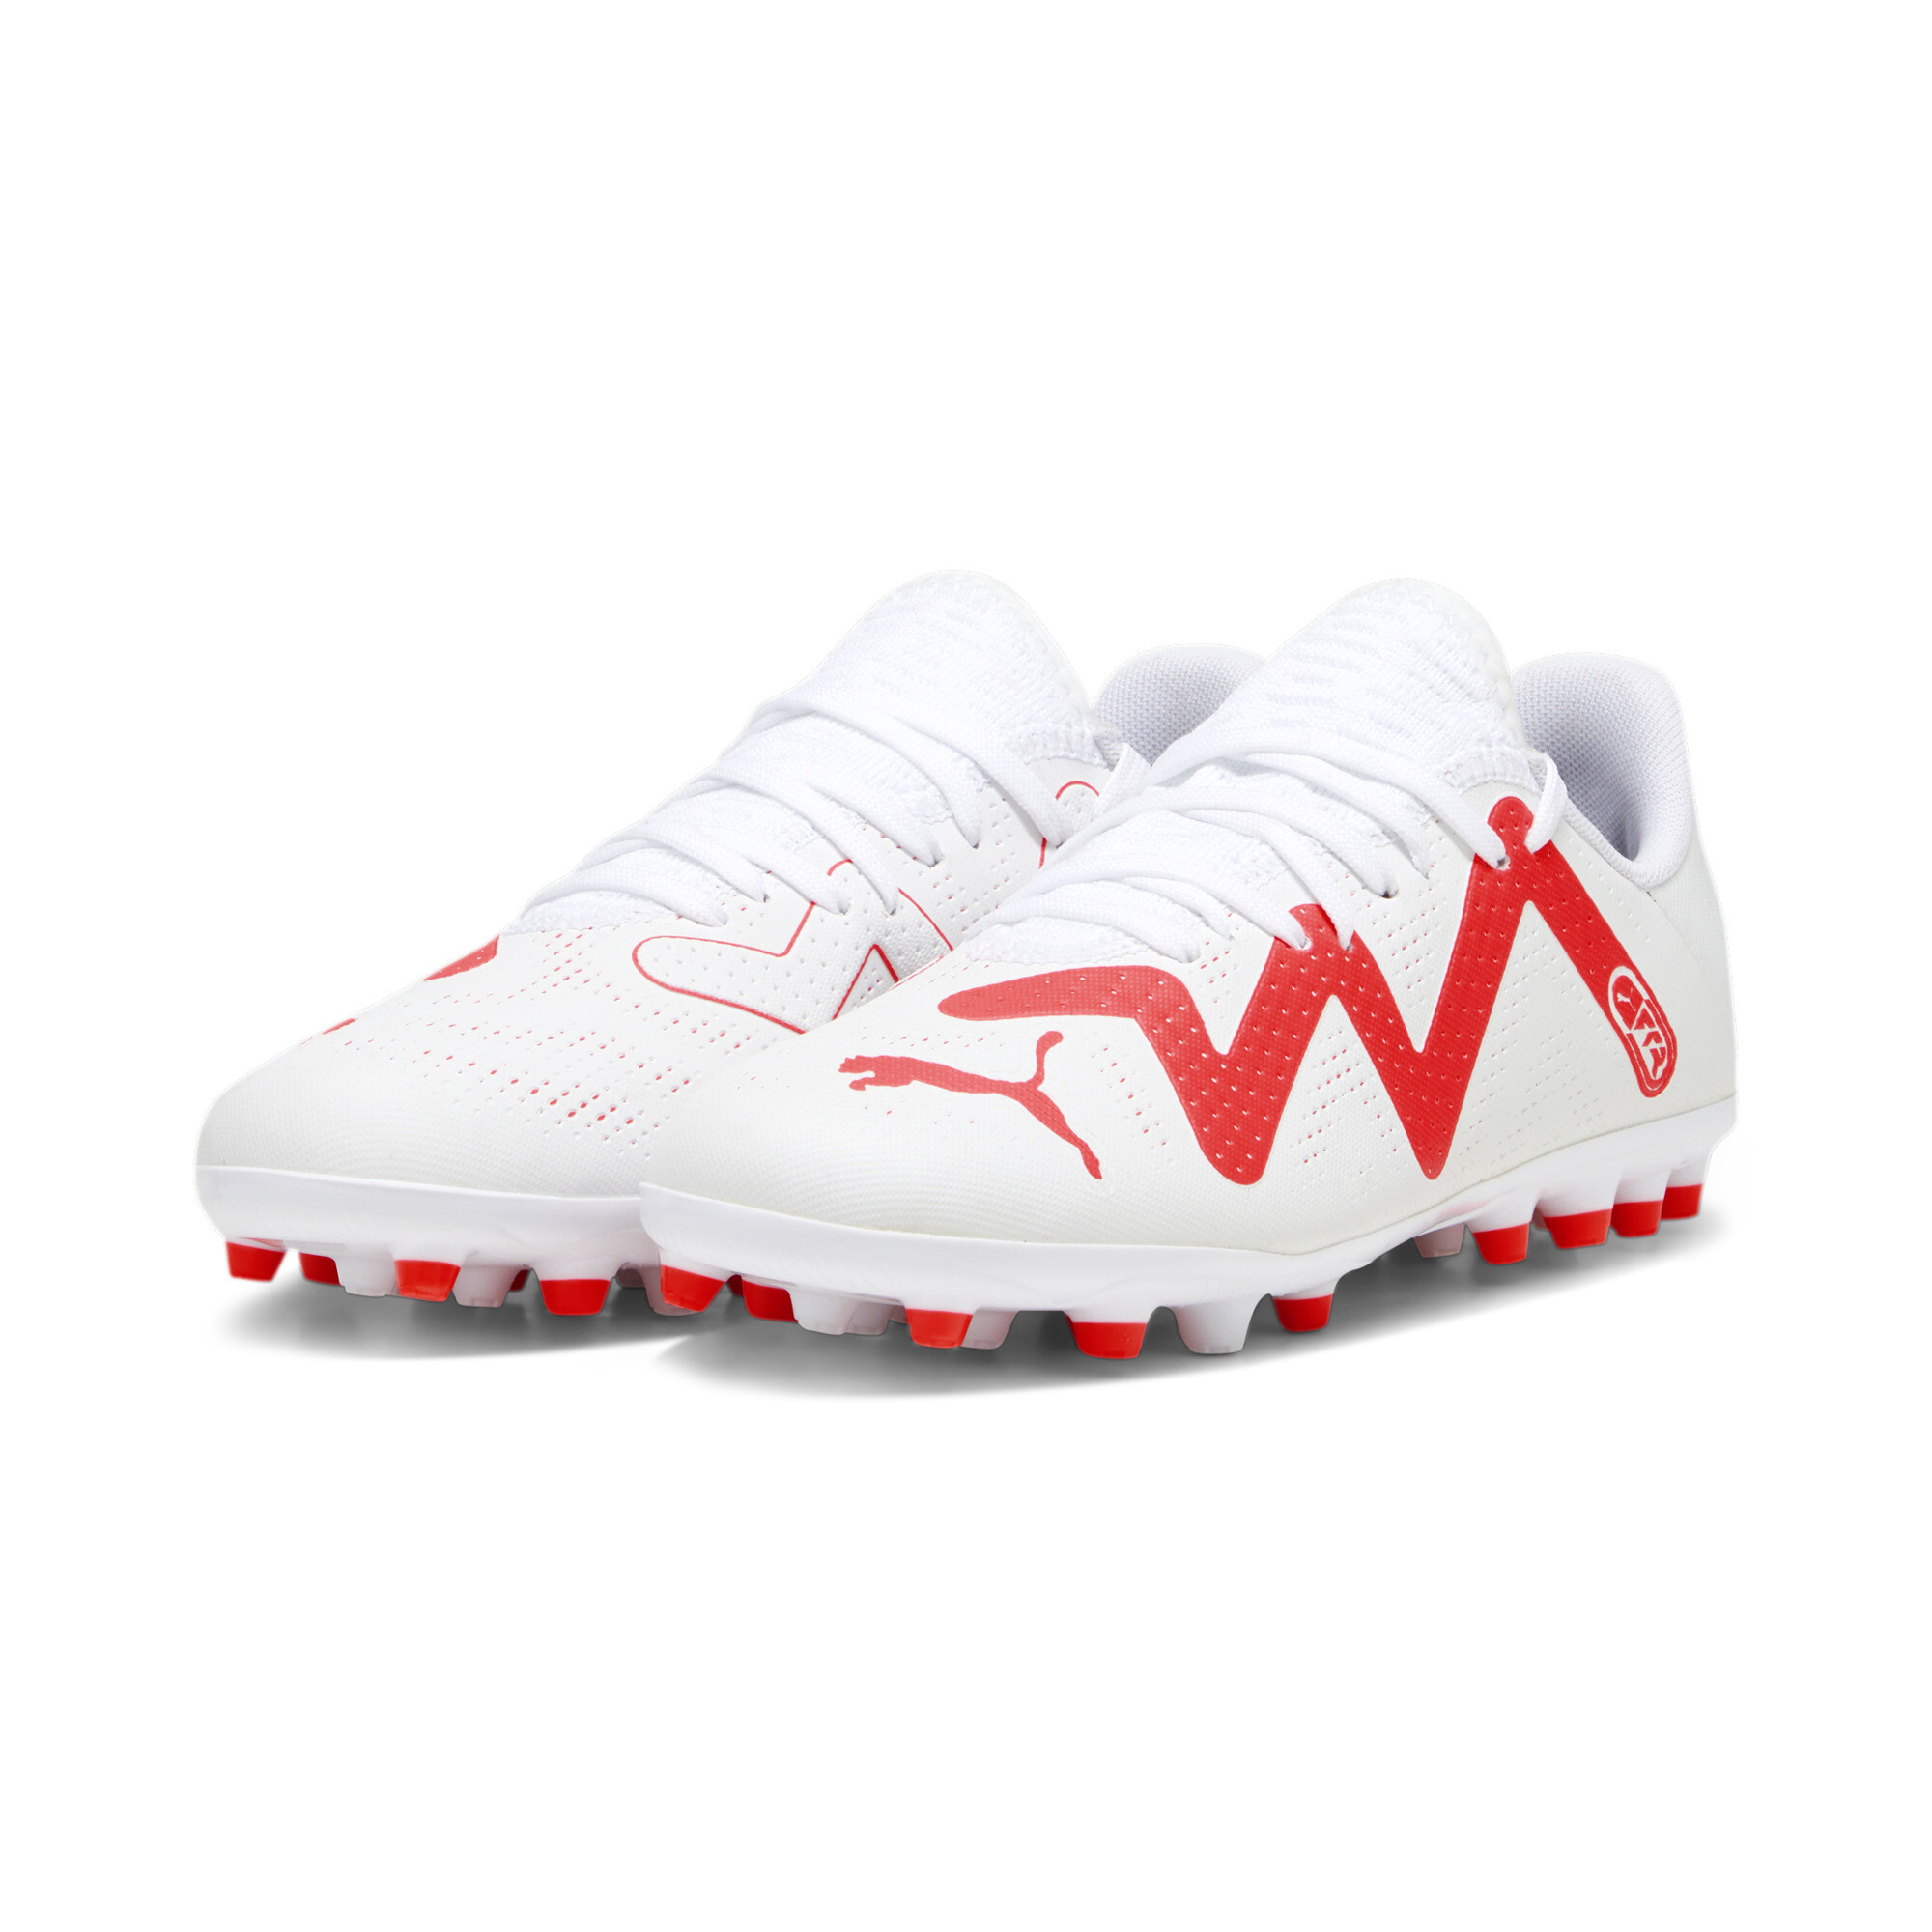 Puma FUTURE PLAY MG Youth Football Boots, White, Size 32.5, Shoes